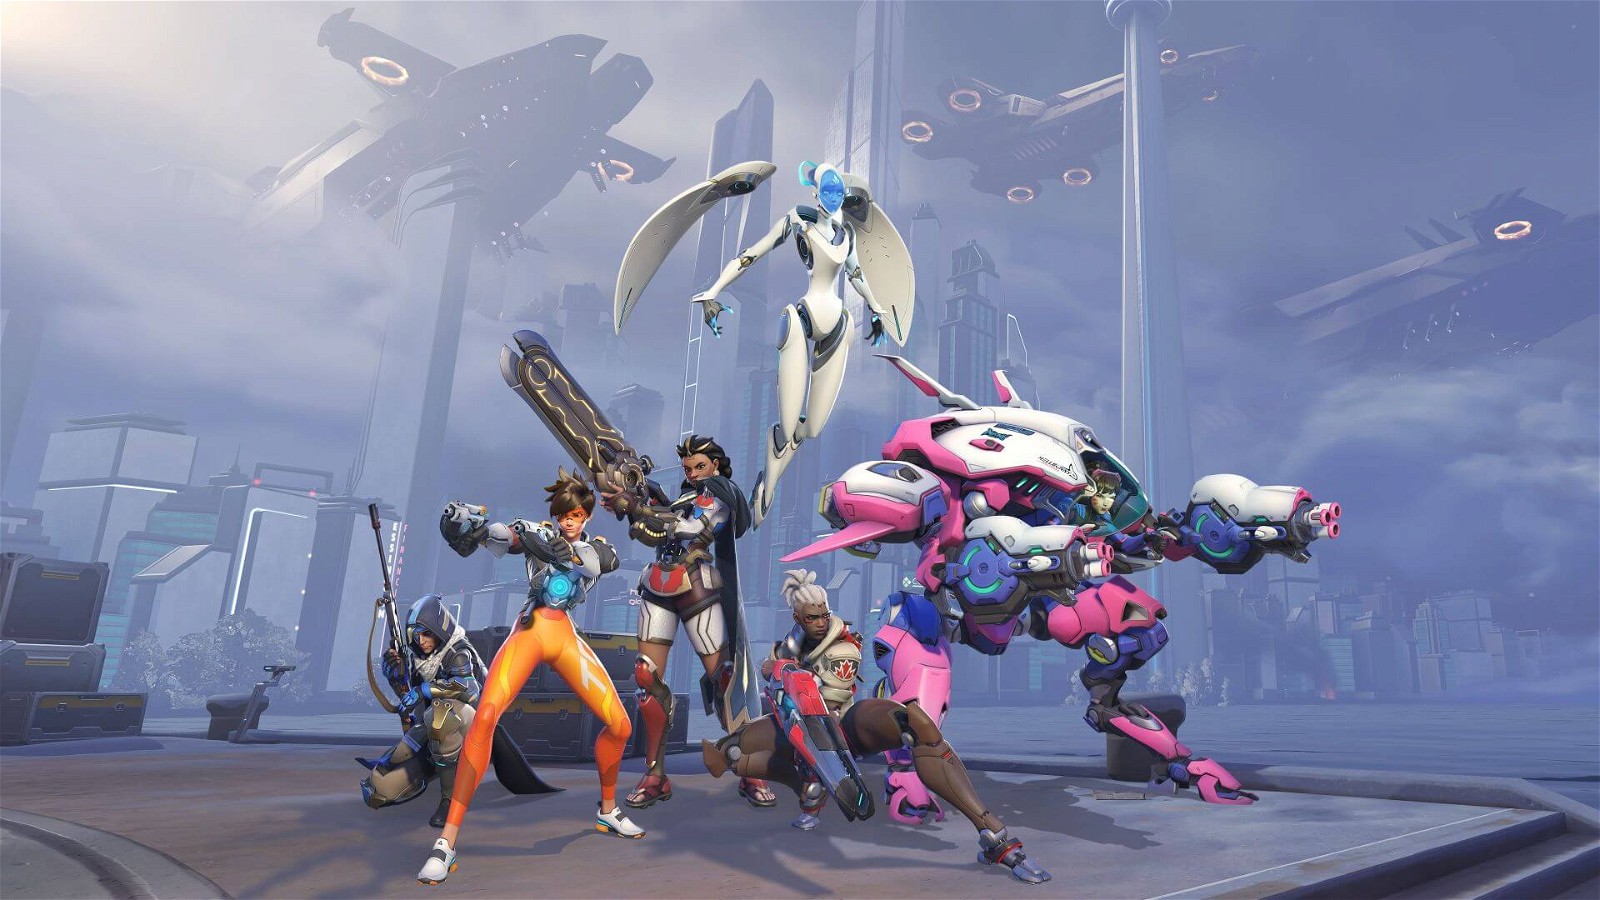 Marvel is making an Overwatch-style shooter game